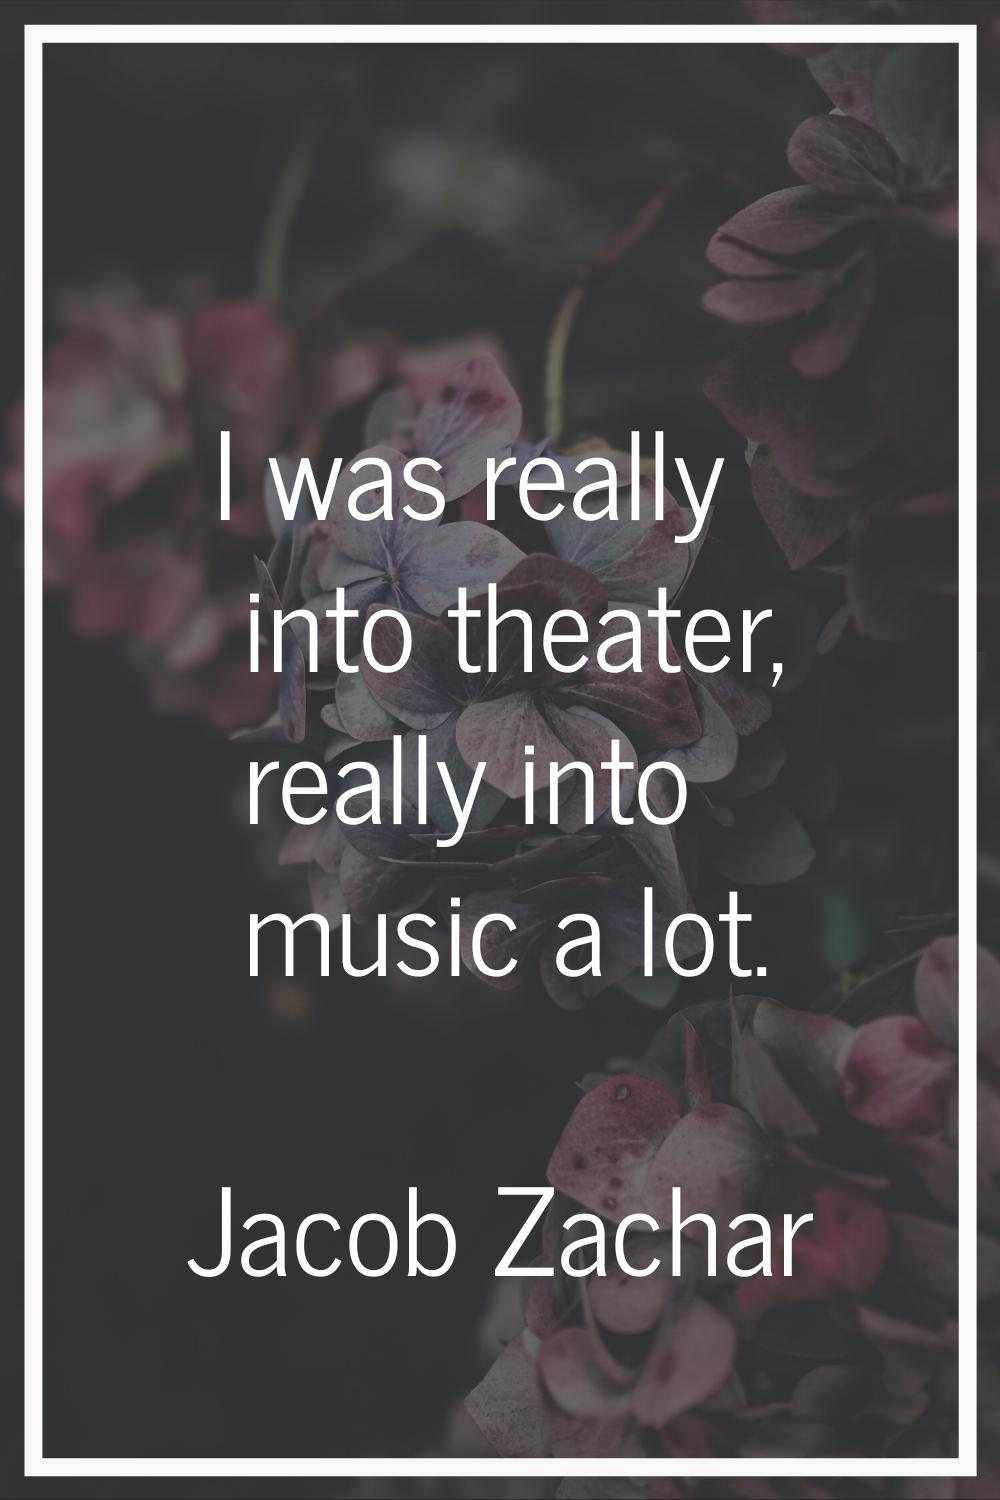 I was really into theater, really into music a lot.